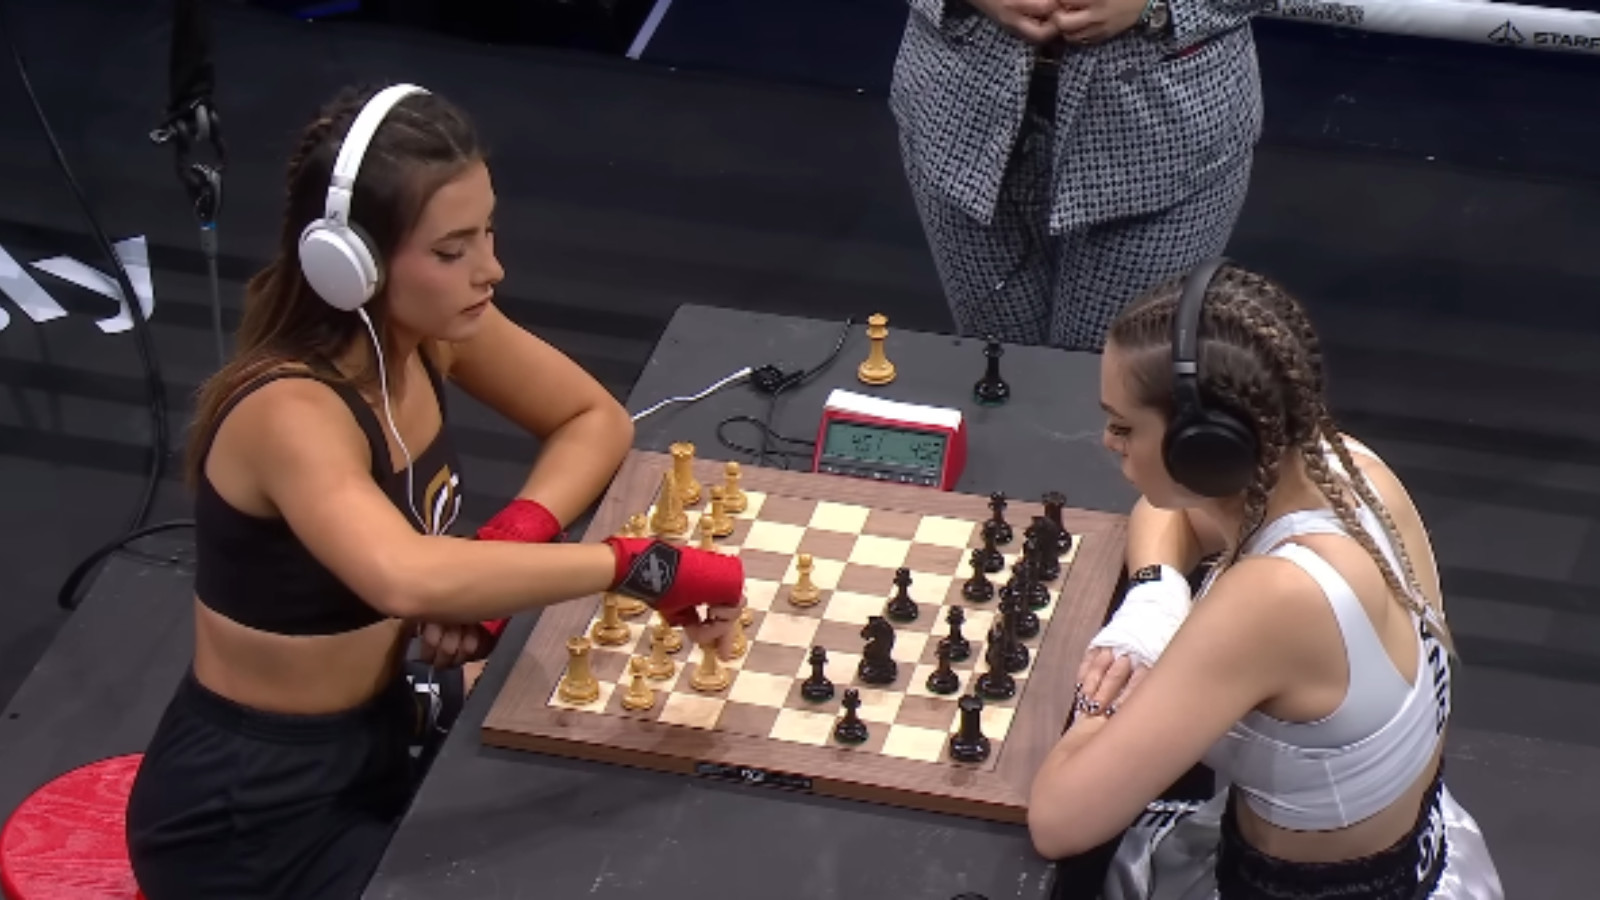 Dina Belenkaya leans into heel role against Andrea Botez in budding  chessboxing rivalry - Dot Esports